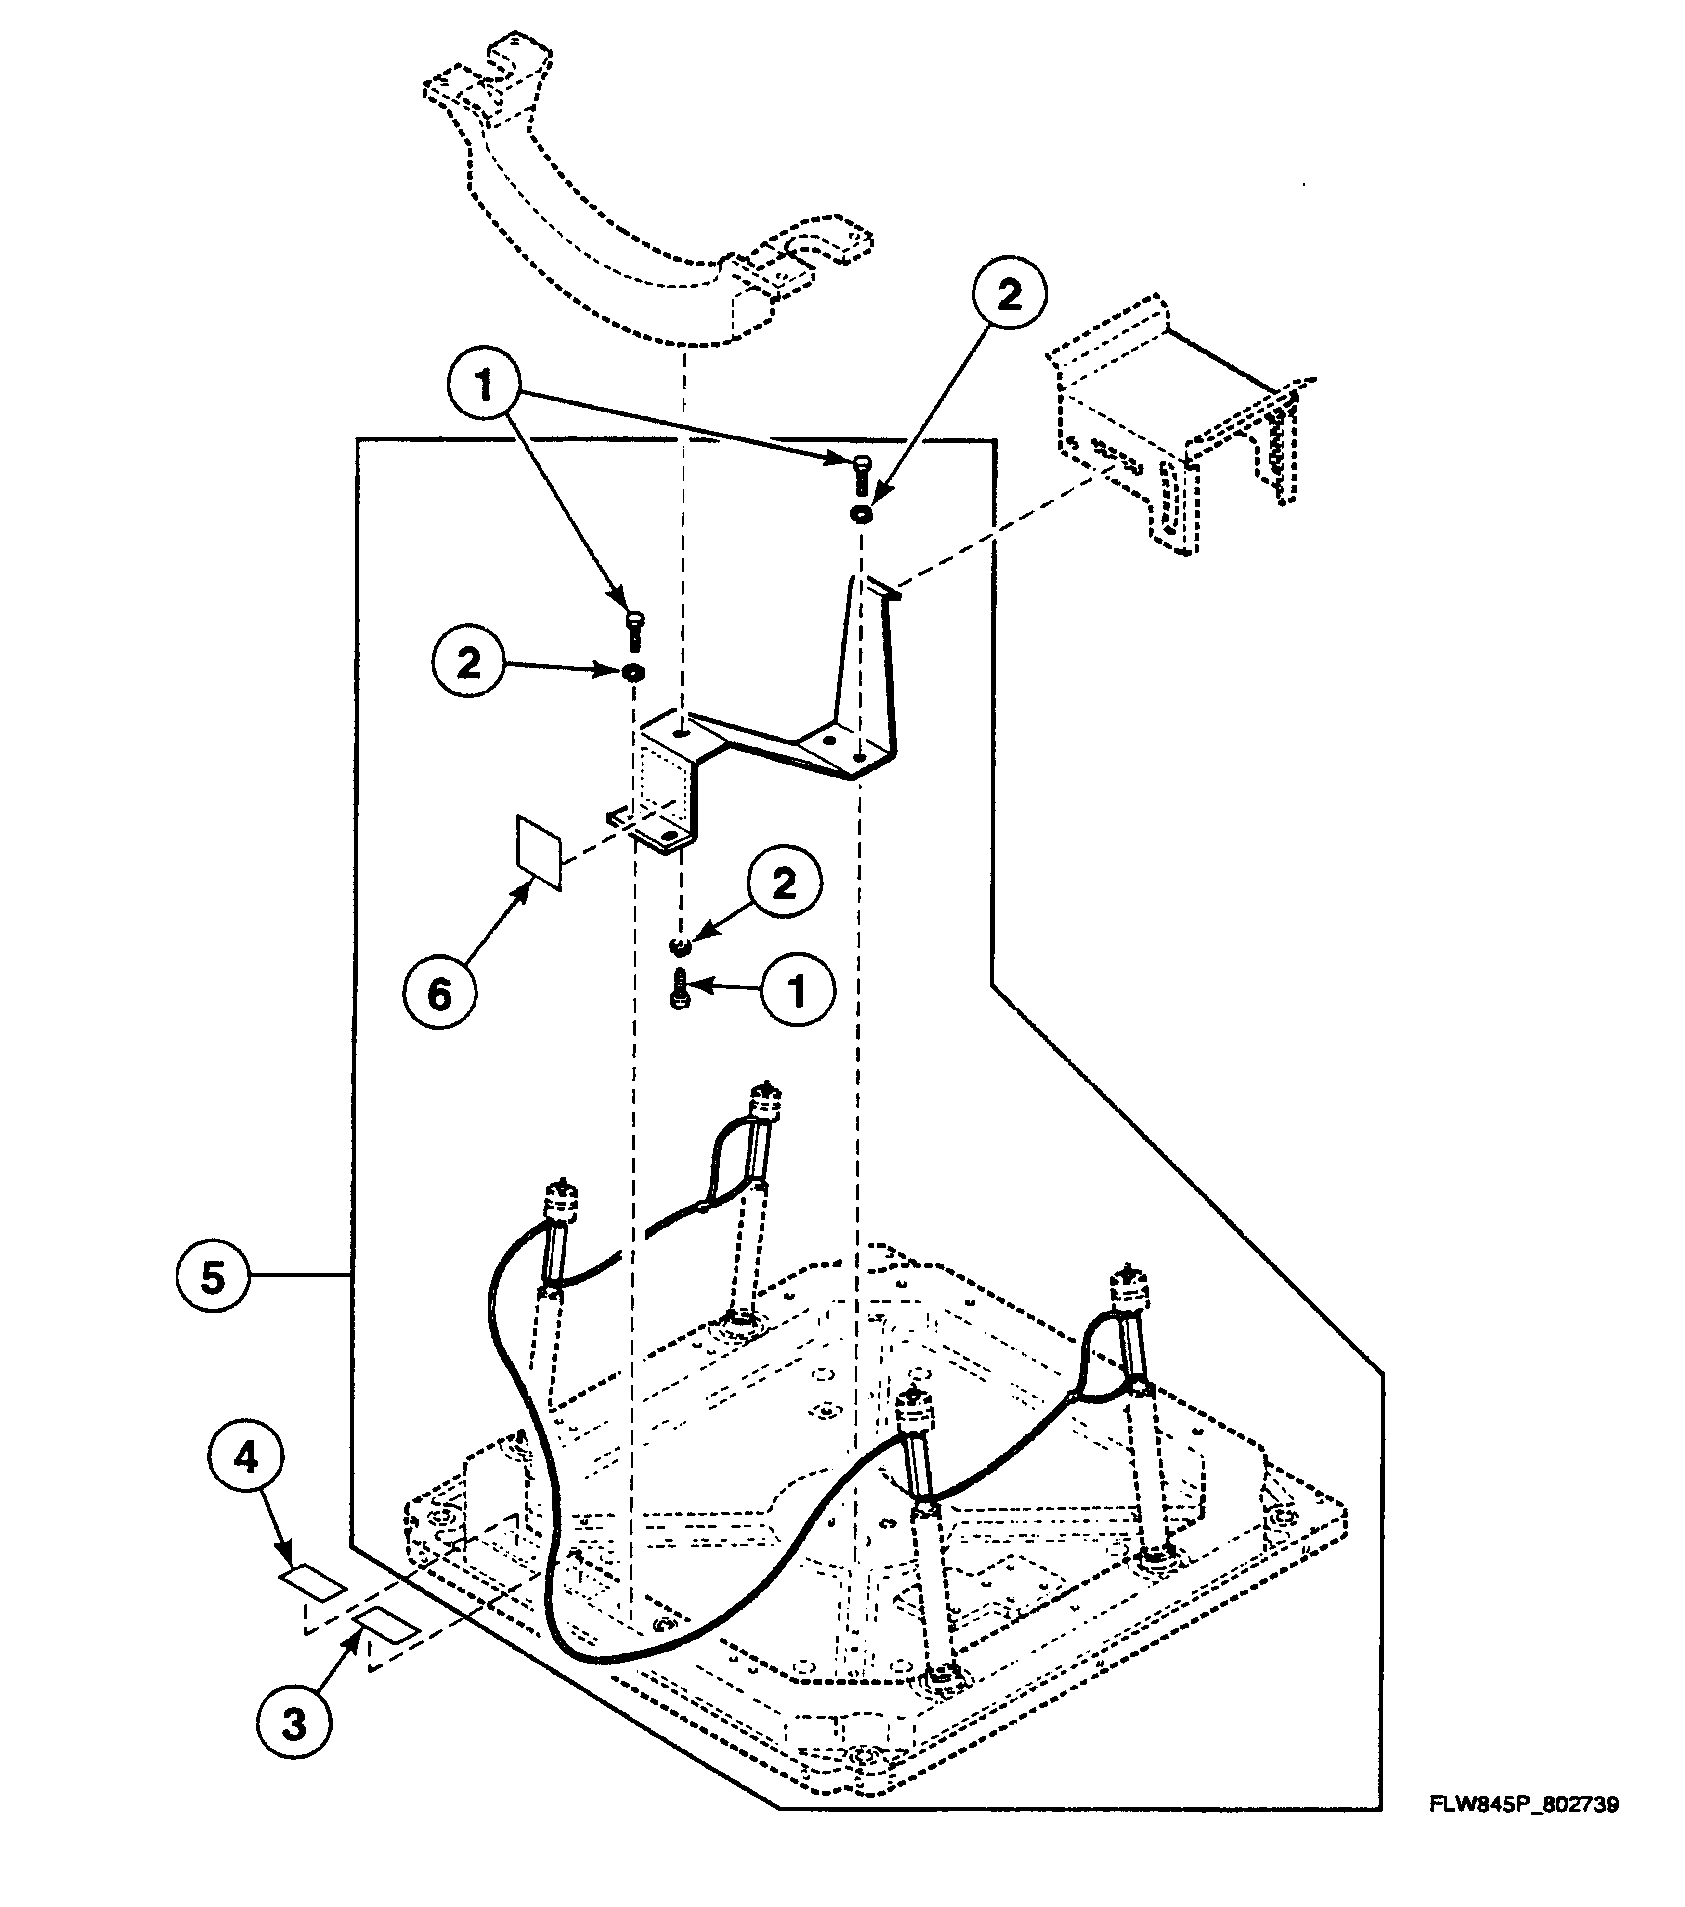 33 Speed Queen Commercial Washer Parts Diagram